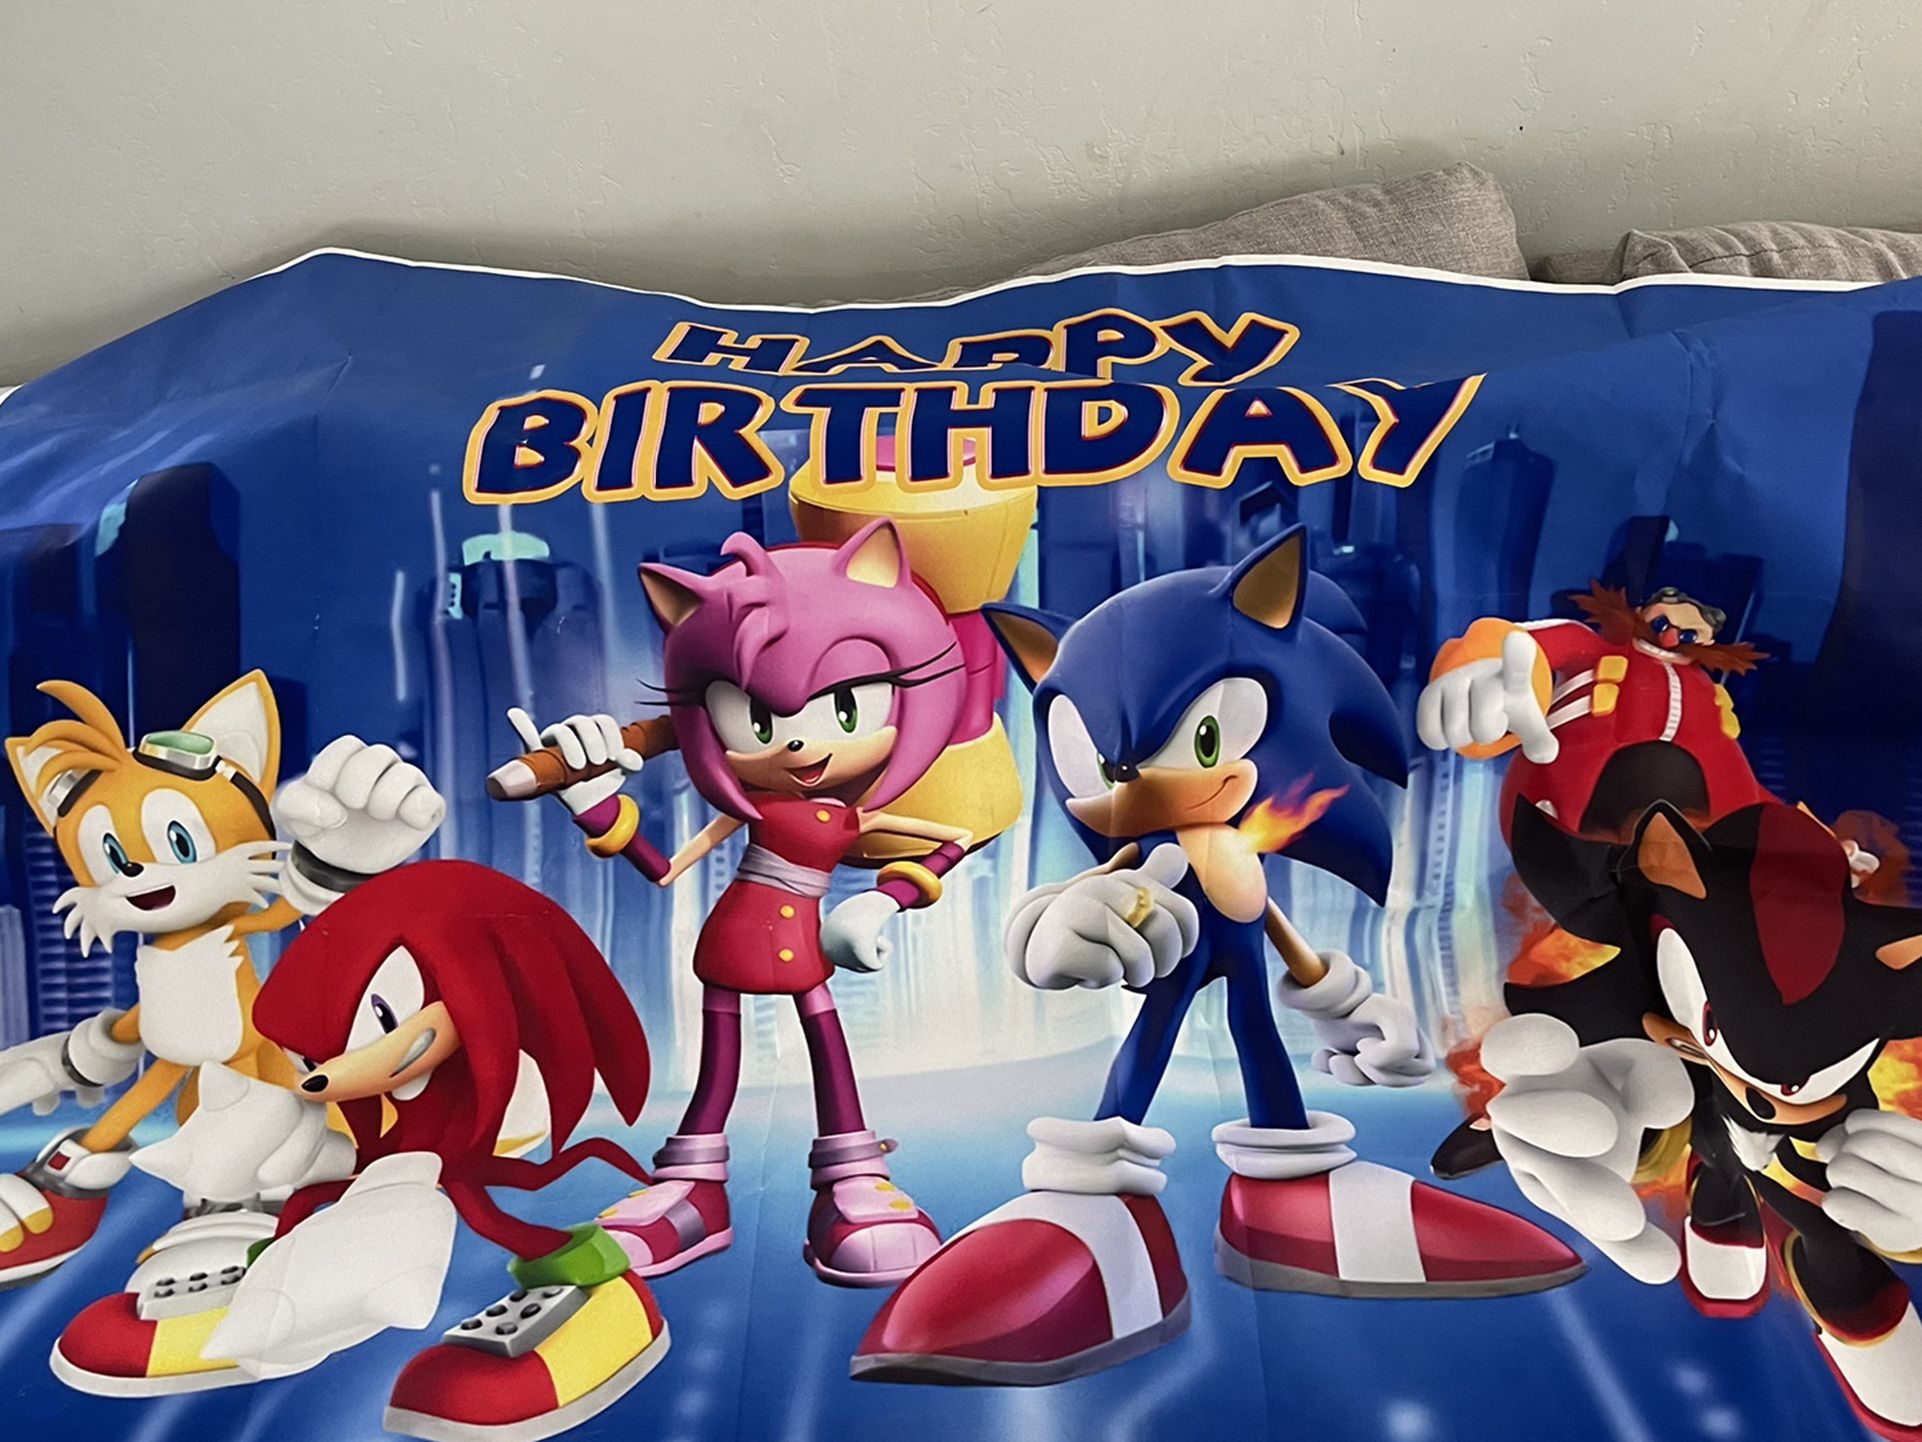 Sonic Balloon Bouquet for Sale in Chino, CA - OfferUp